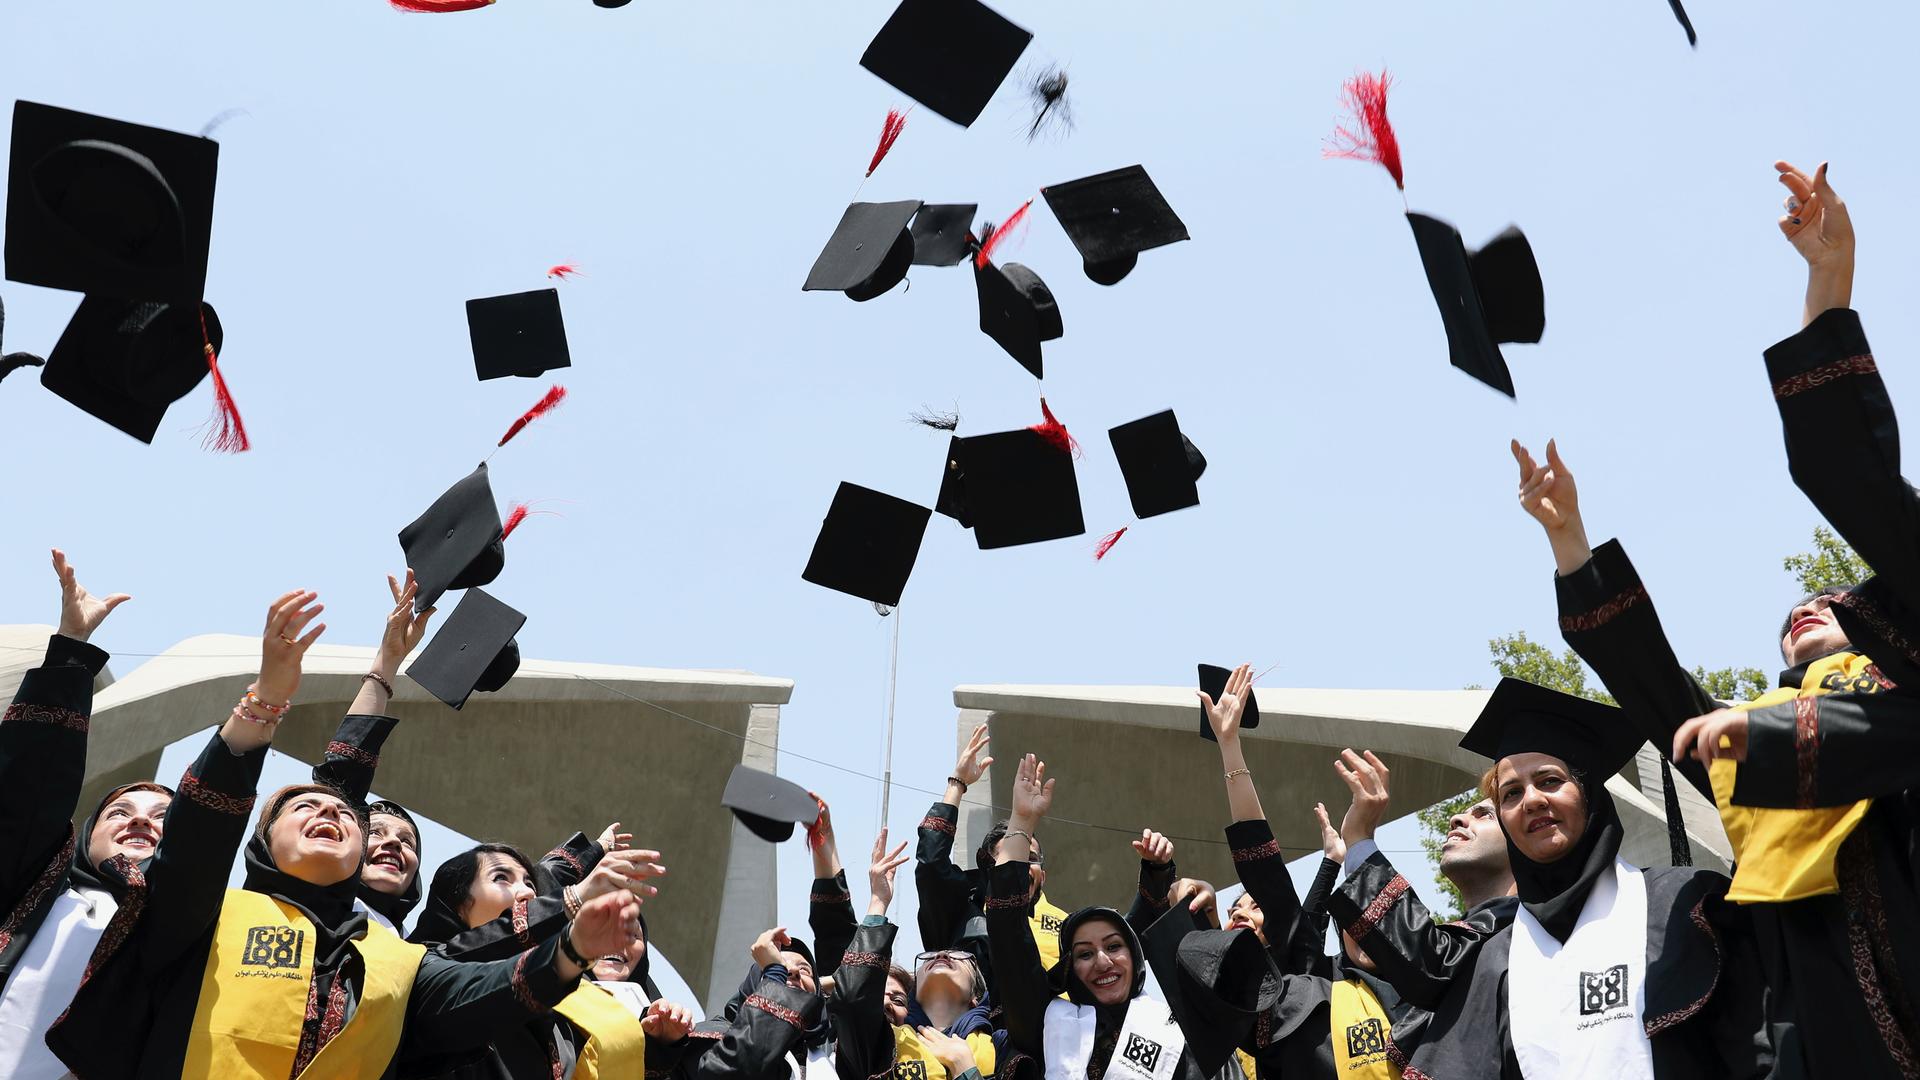 Students throw their hats in the air to celebrate a graduation in front of the main gate of Tehran University in Tehran, Iran, July 7, 2019.